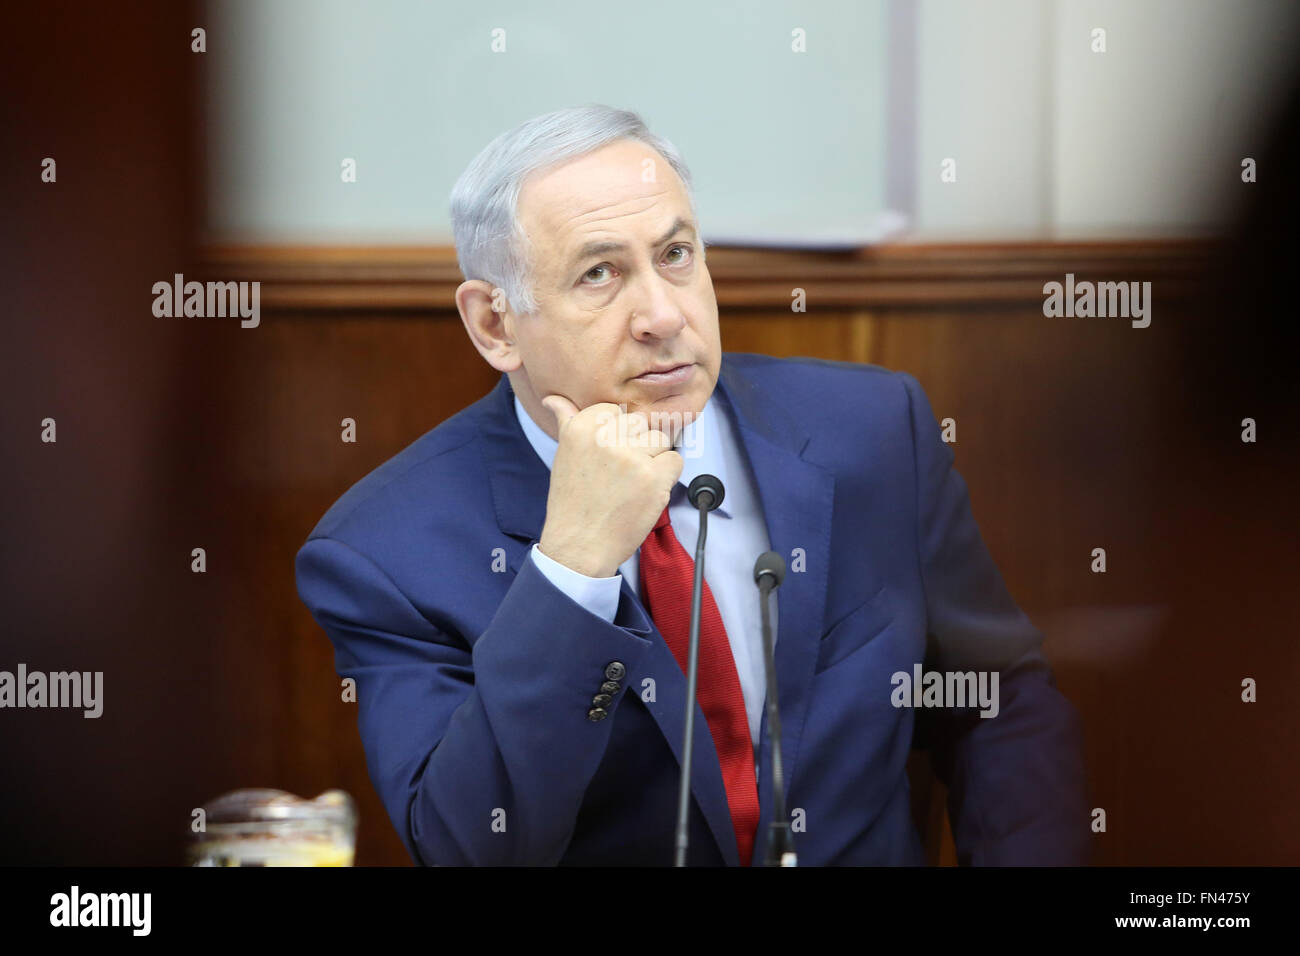 Jerusalem. 13th Mar, 2016. Israeli Prime Minister Benjamin Netanyahu attends the weekly cabinet meeting at his Jerusalem office, March 13, 2016. Israel called on the six world powers to take 'punitive measures' against Iran after the latter's test launching of missiles earlier this week. Credit:  JINI/Marc Israel Sellem/Xinhua/Alamy Live News Stock Photo